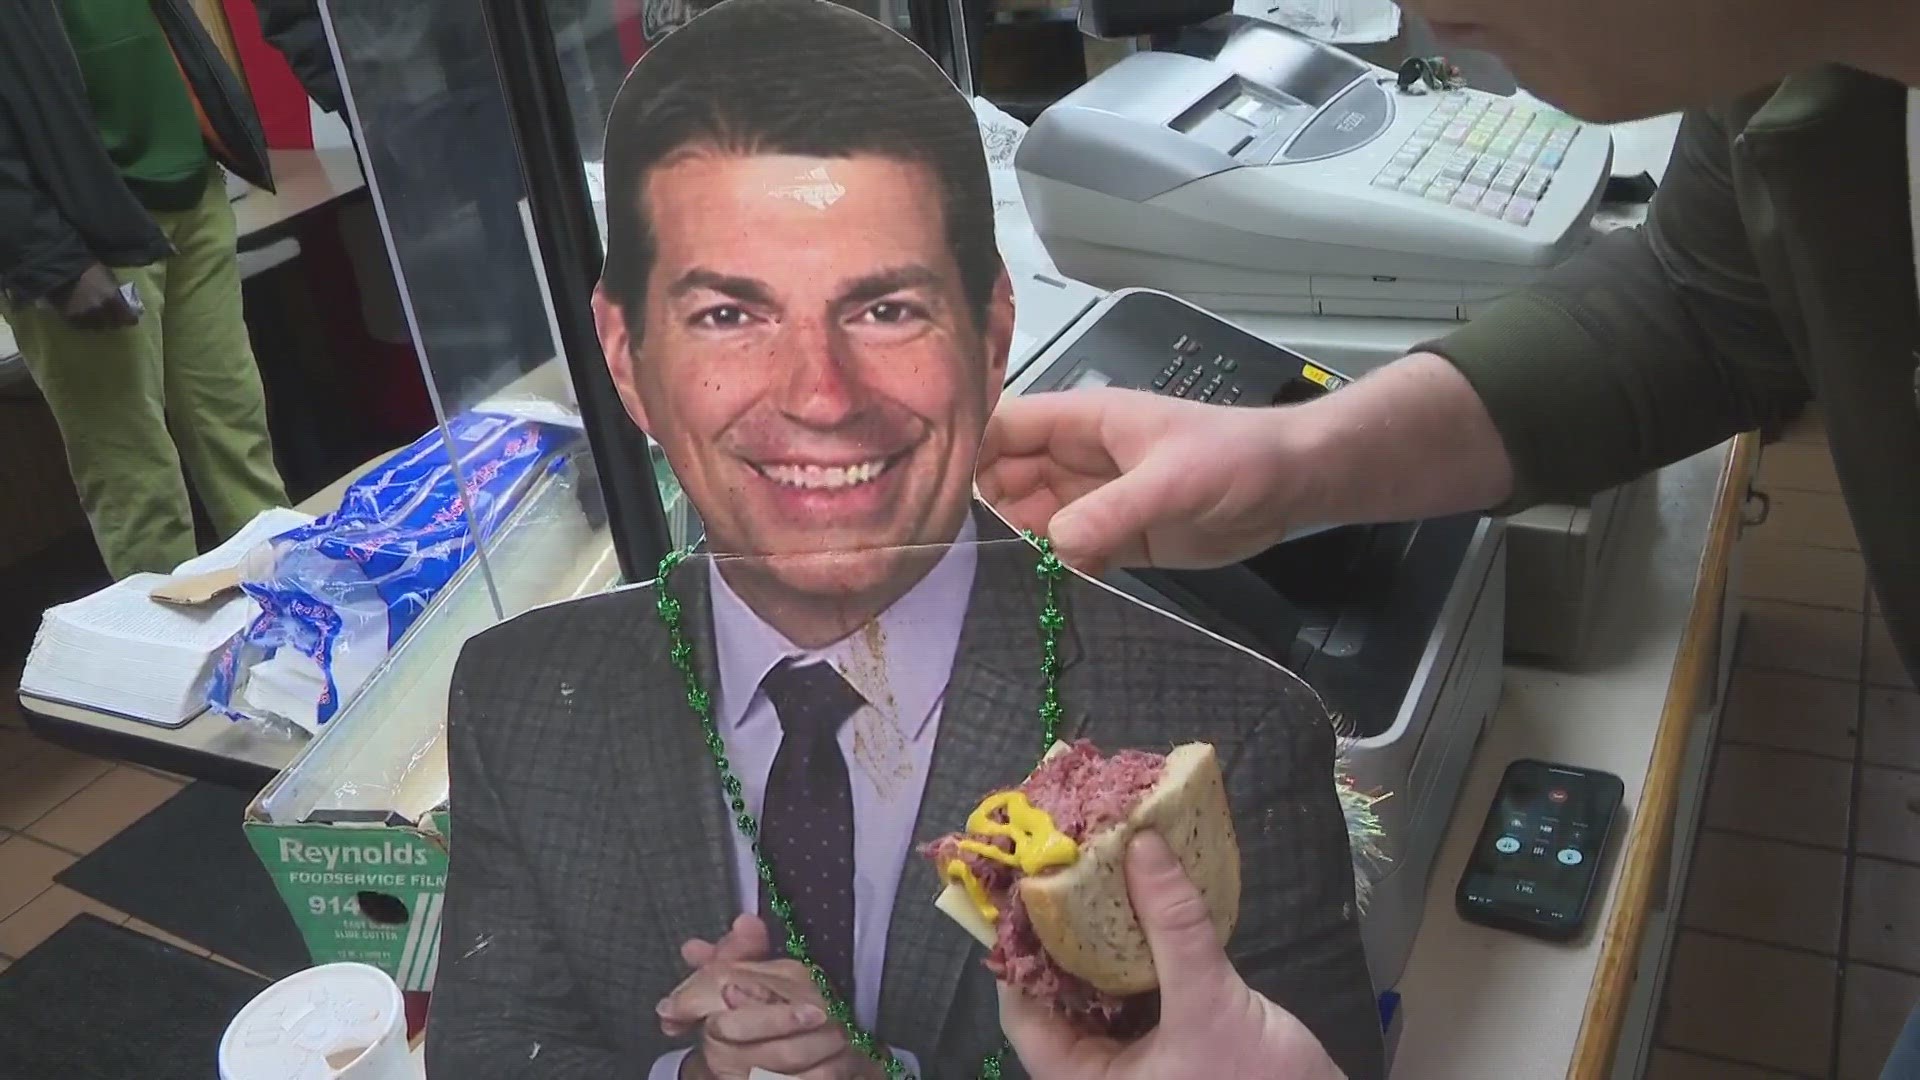 3News' Austin Love dropped by Slyman's with 'flat Dave' to get the St. Patrick's Day celebration started in Cleveland.